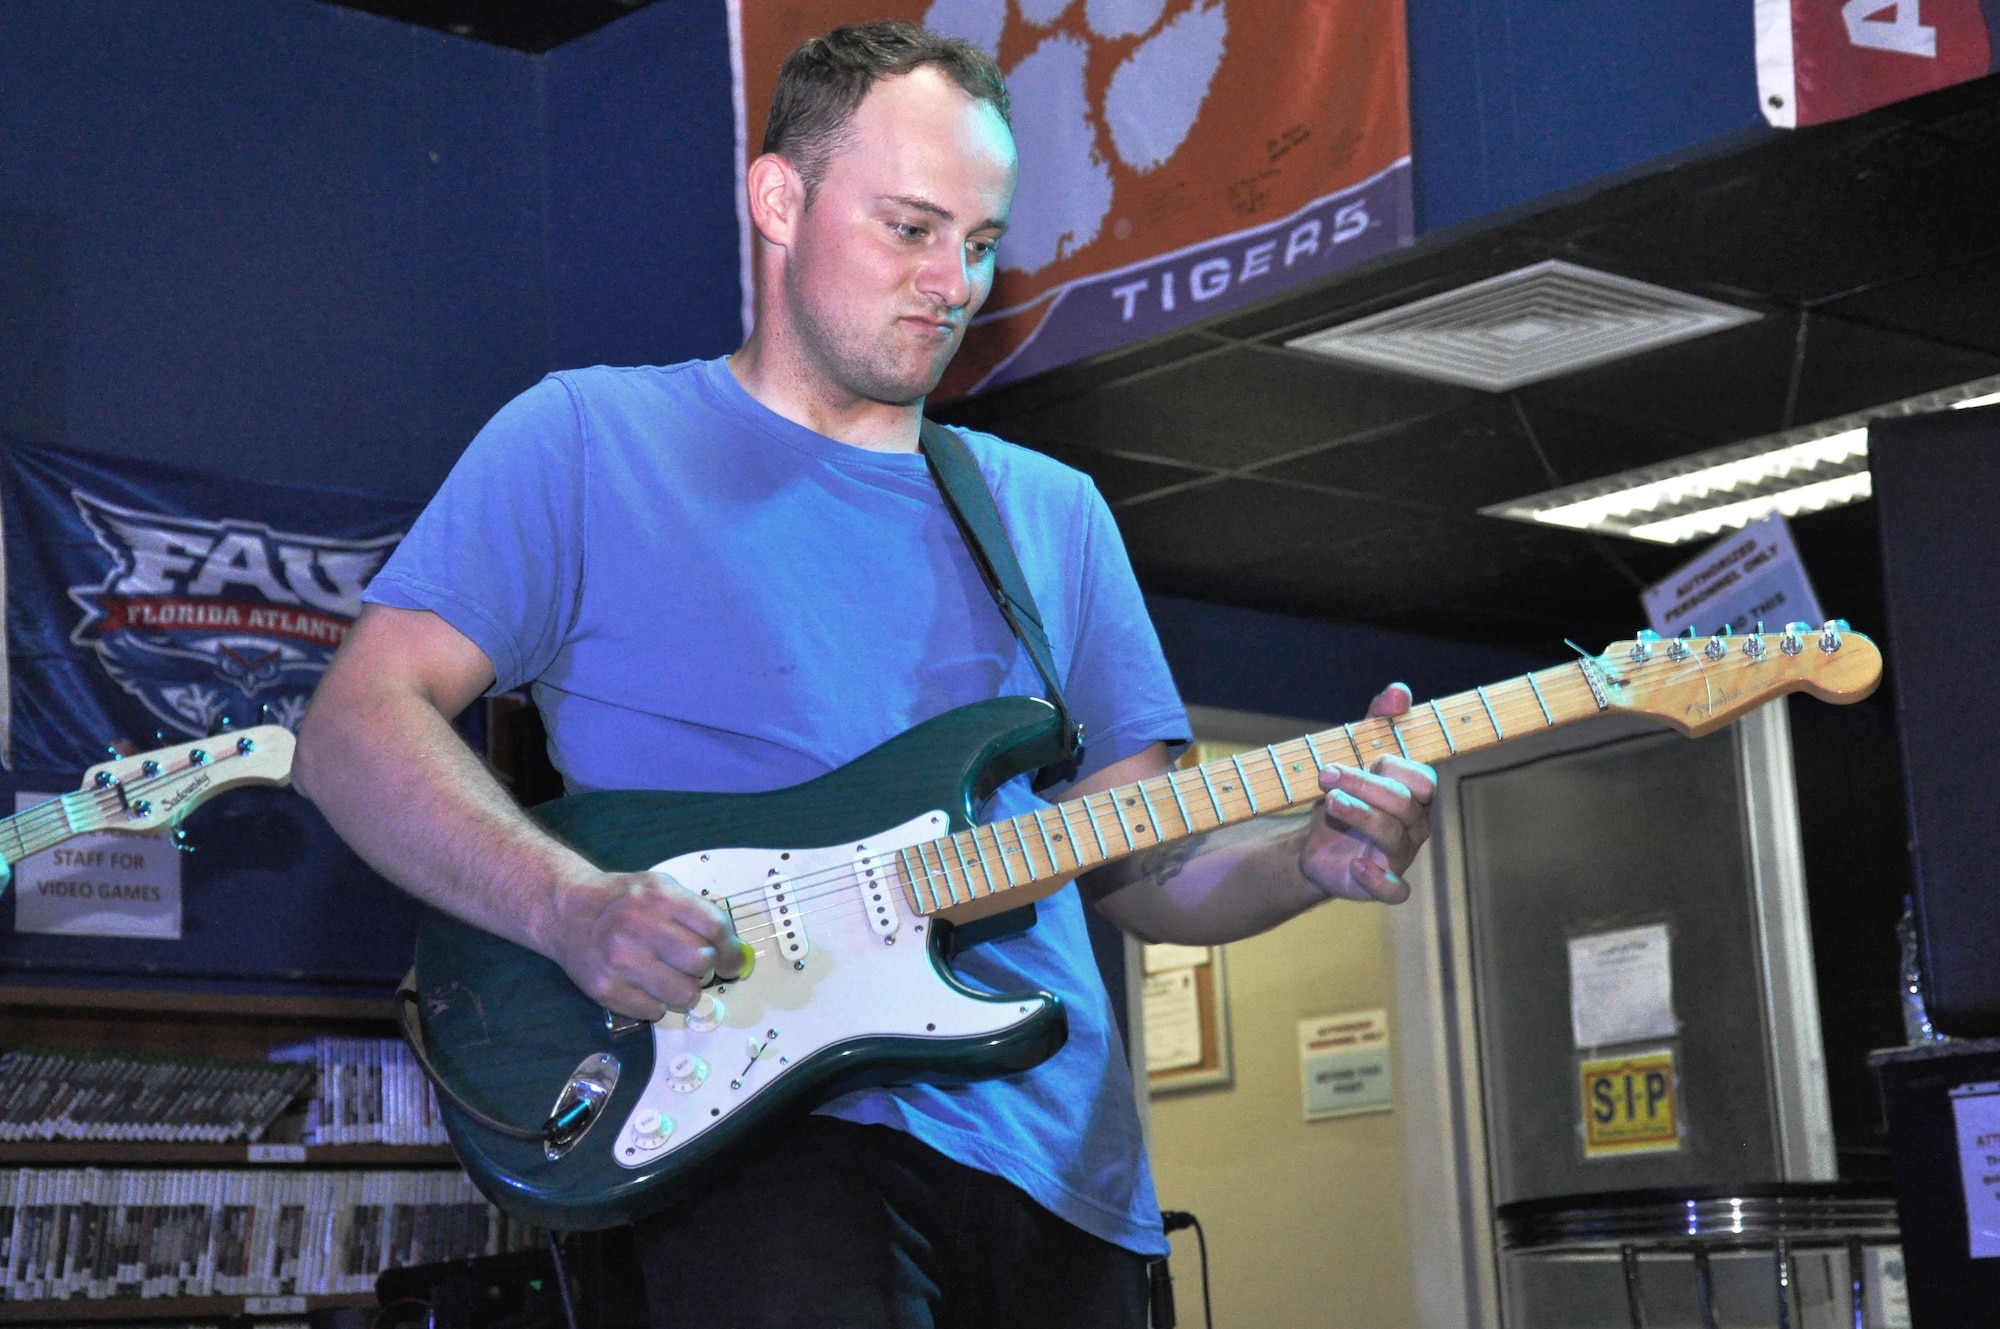 Airman 1st Class Josiah Joyce, guitarist and equipment custodian for the AFCENT Band, jams out on the guitar during an extended solo during the band’s cover of “Freebird” by Lynyrd Skynyrd at the Starlifter Memorial Day concert Monday, May 29, 2017, at an undisclosed location in Southwest Asia. (U.S. Air Force photo/Master Sgt. Eric Sharman)